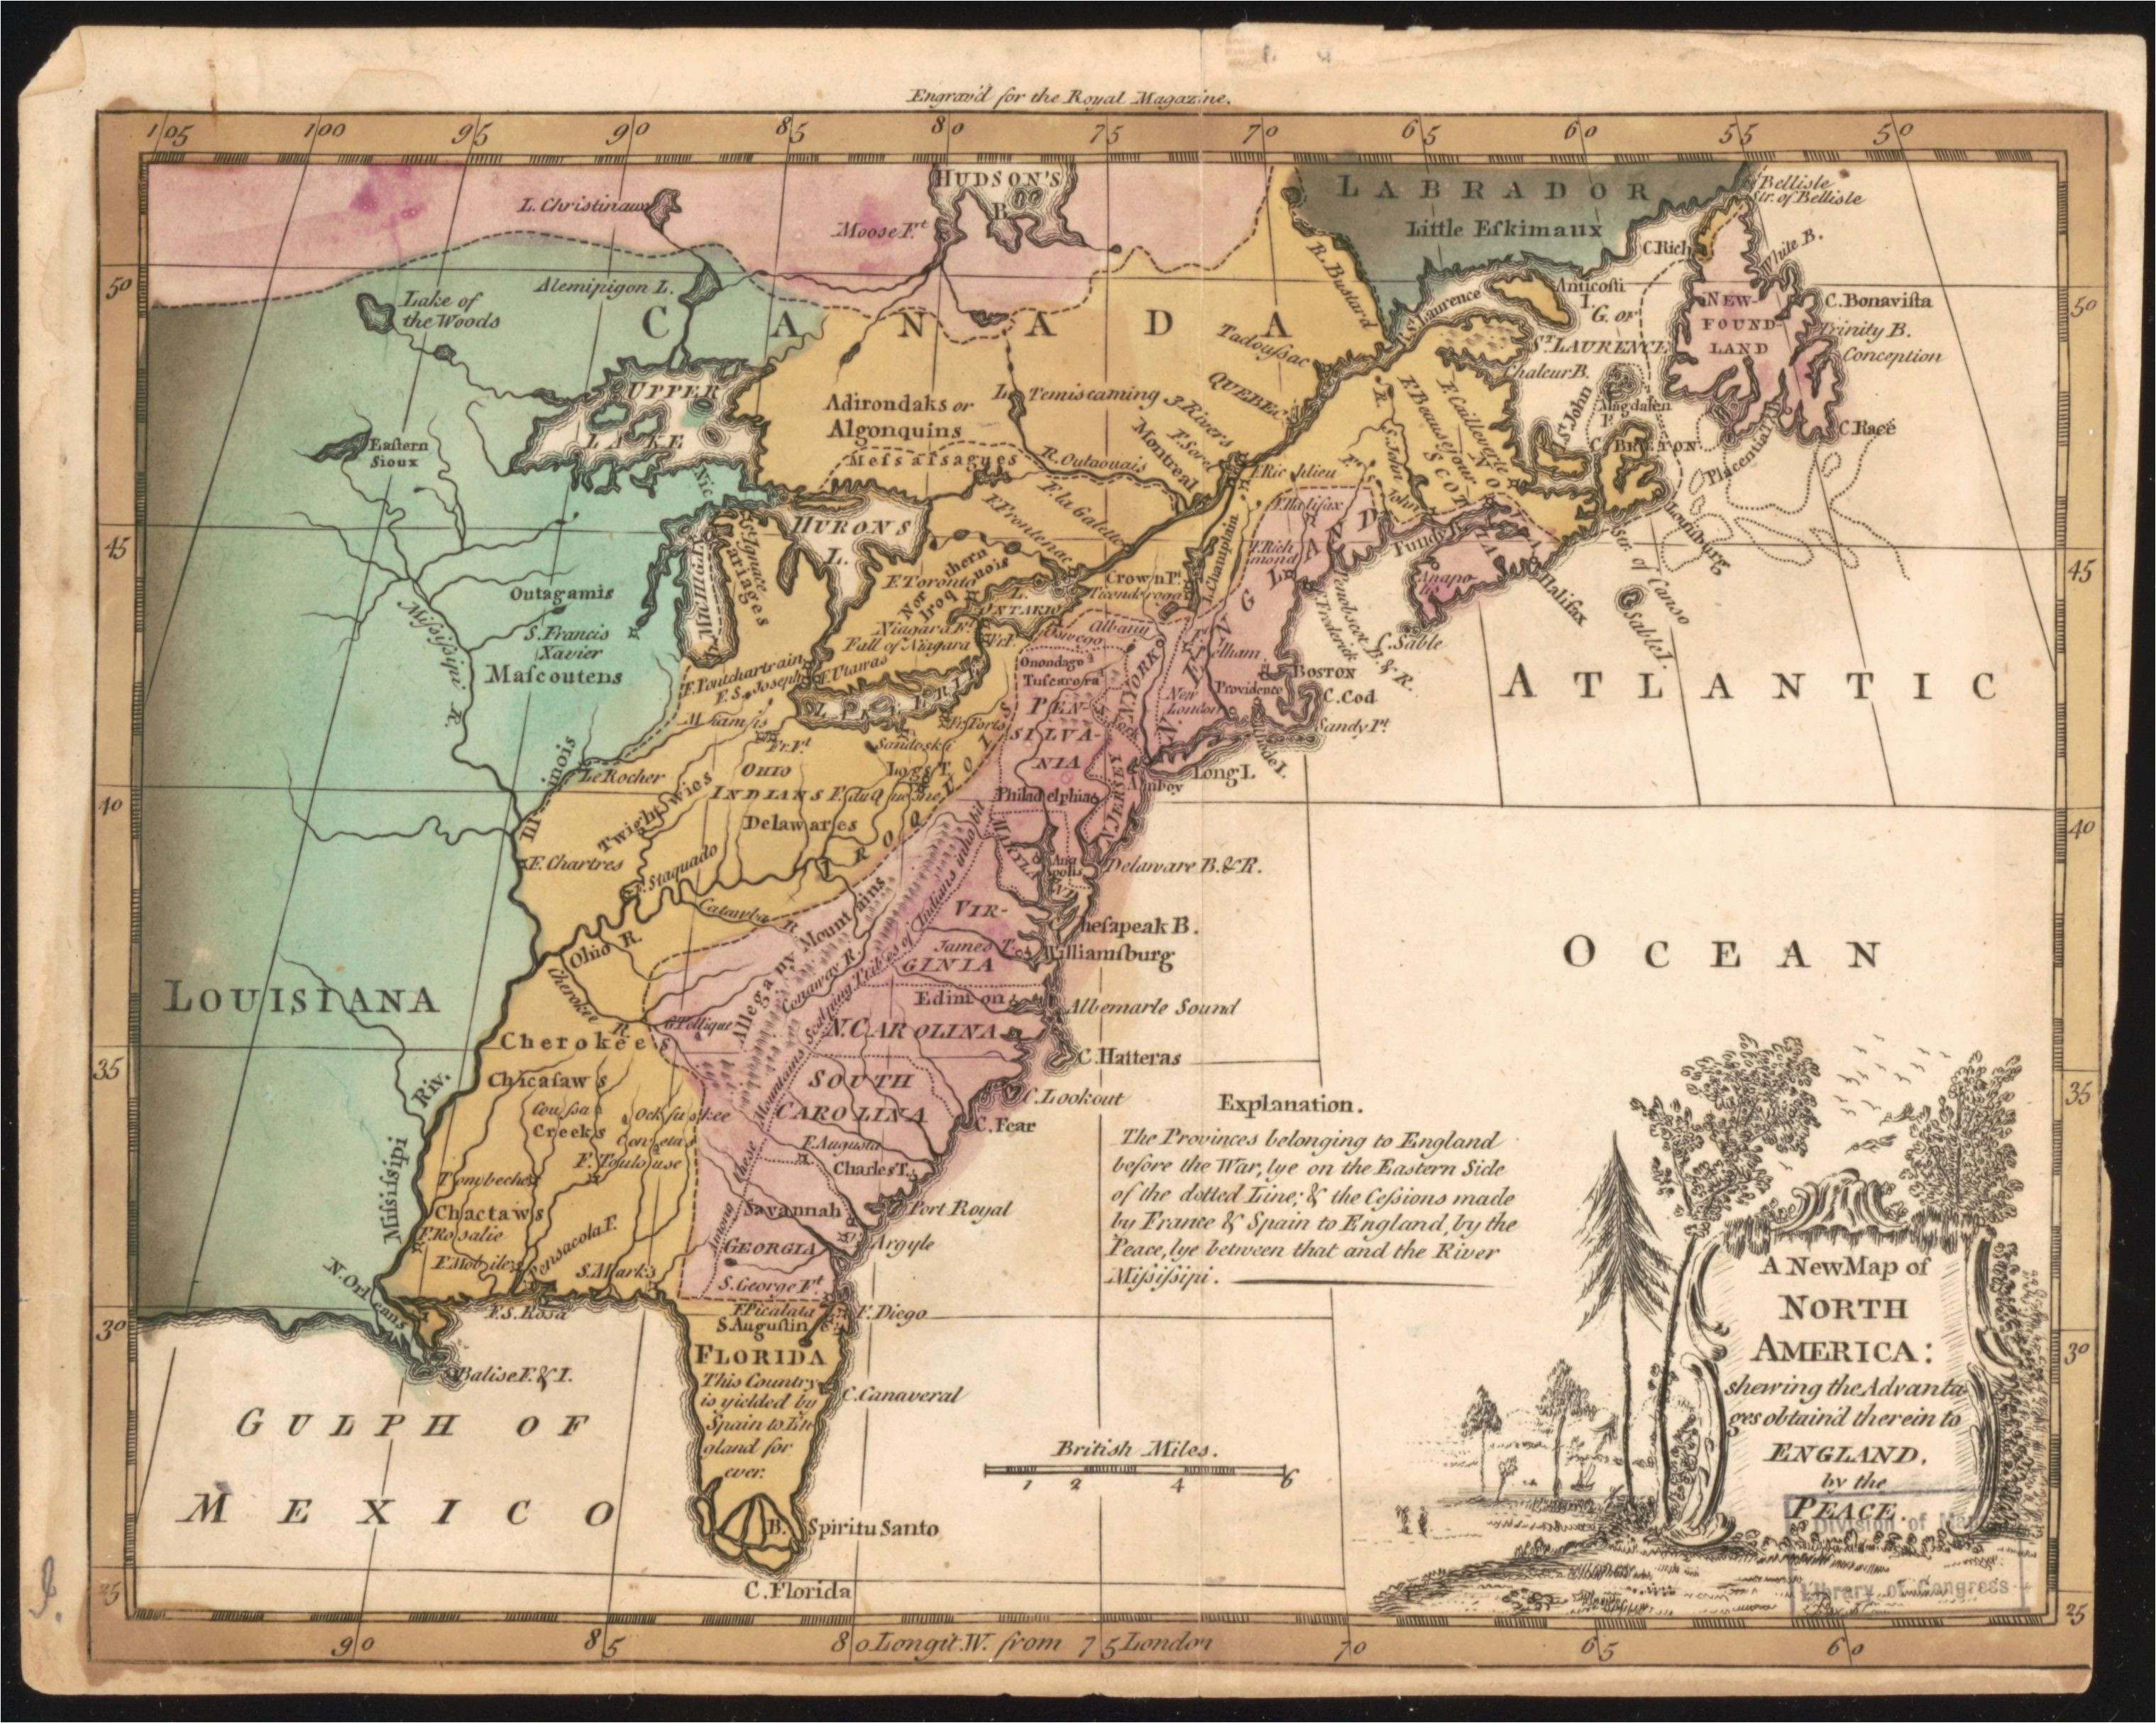 Map Of England To America File A New Map Of North America Shewing The Advantages Of Map Of England To America 